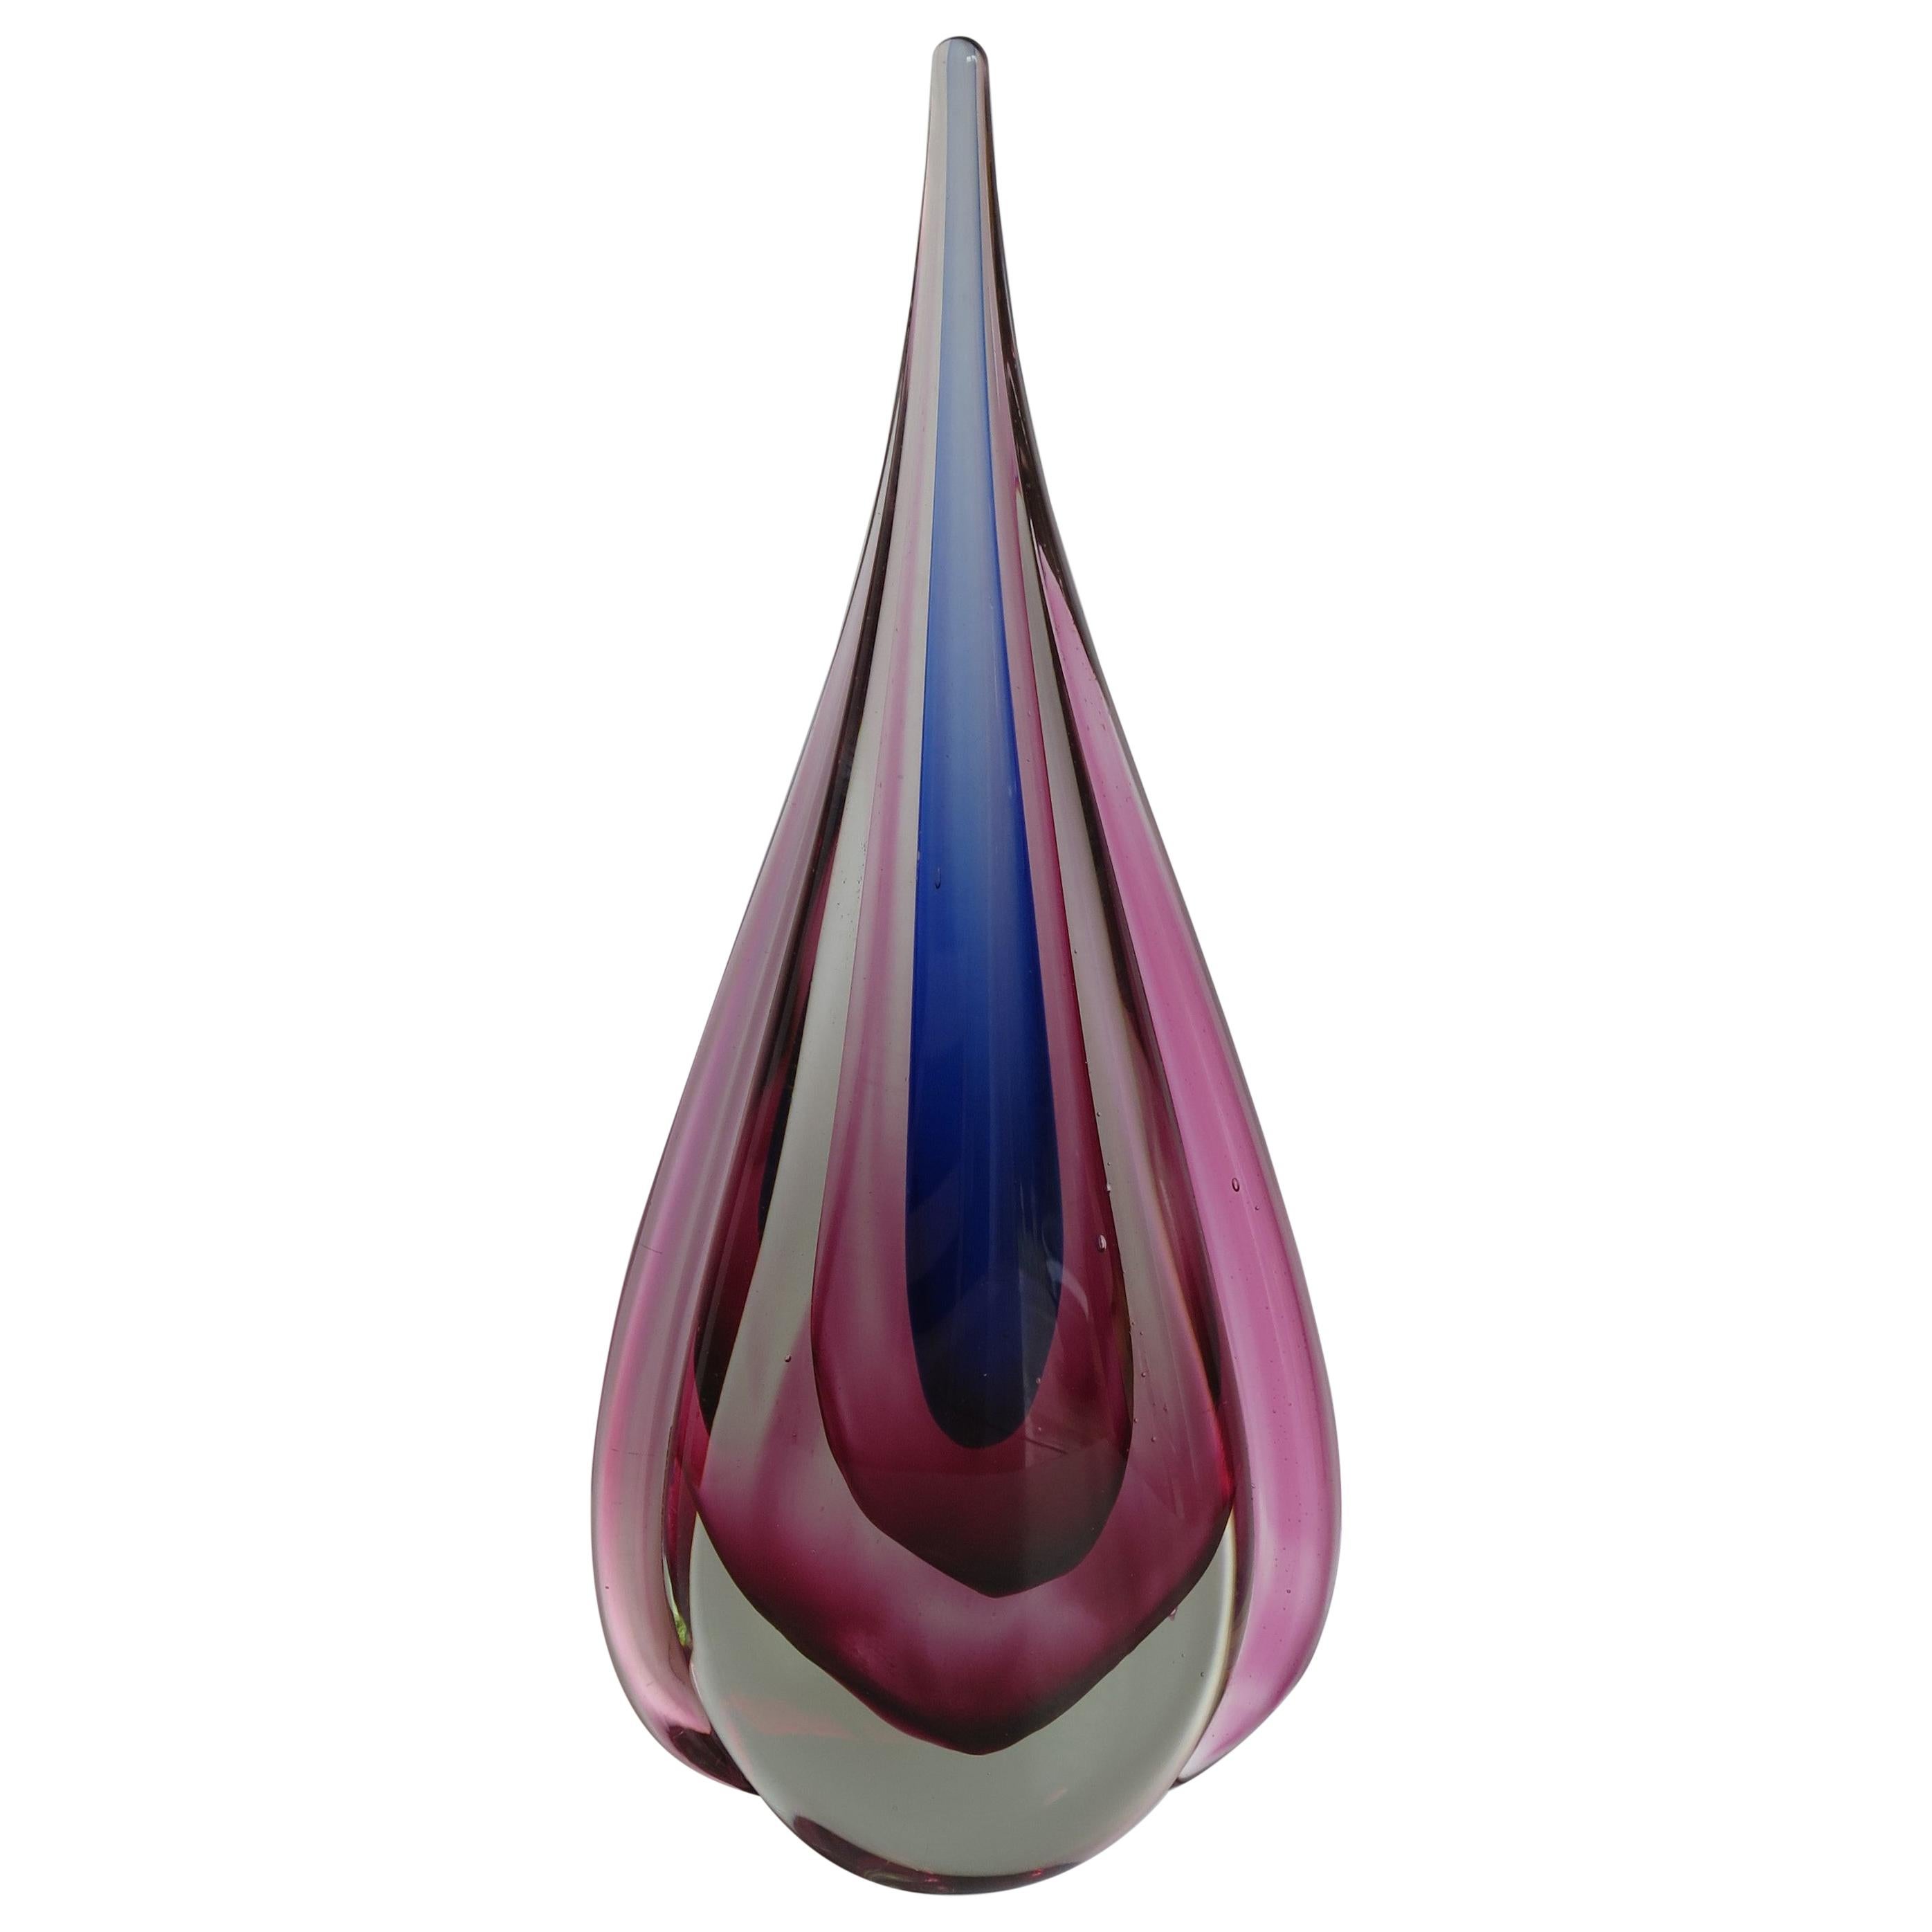 Tall Murano Glass Sommerso Teardrop Sculpture by Flavio Poli, Italy, circa 1950s For Sale